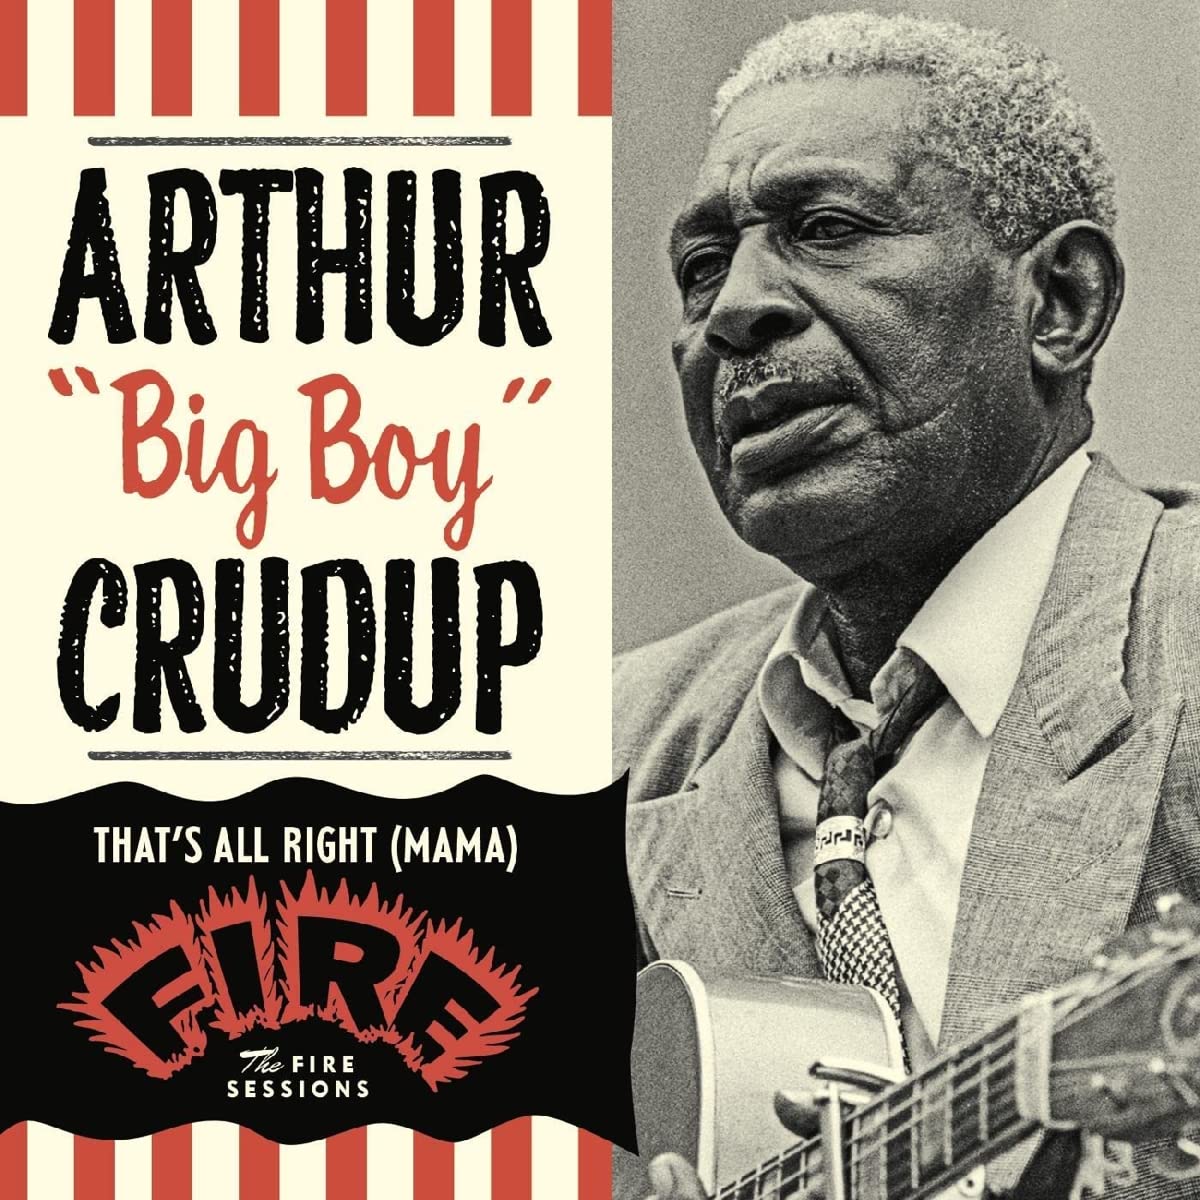 Arthur Big Boy Crudup - That's All Right (Mama) The Fire Sessions